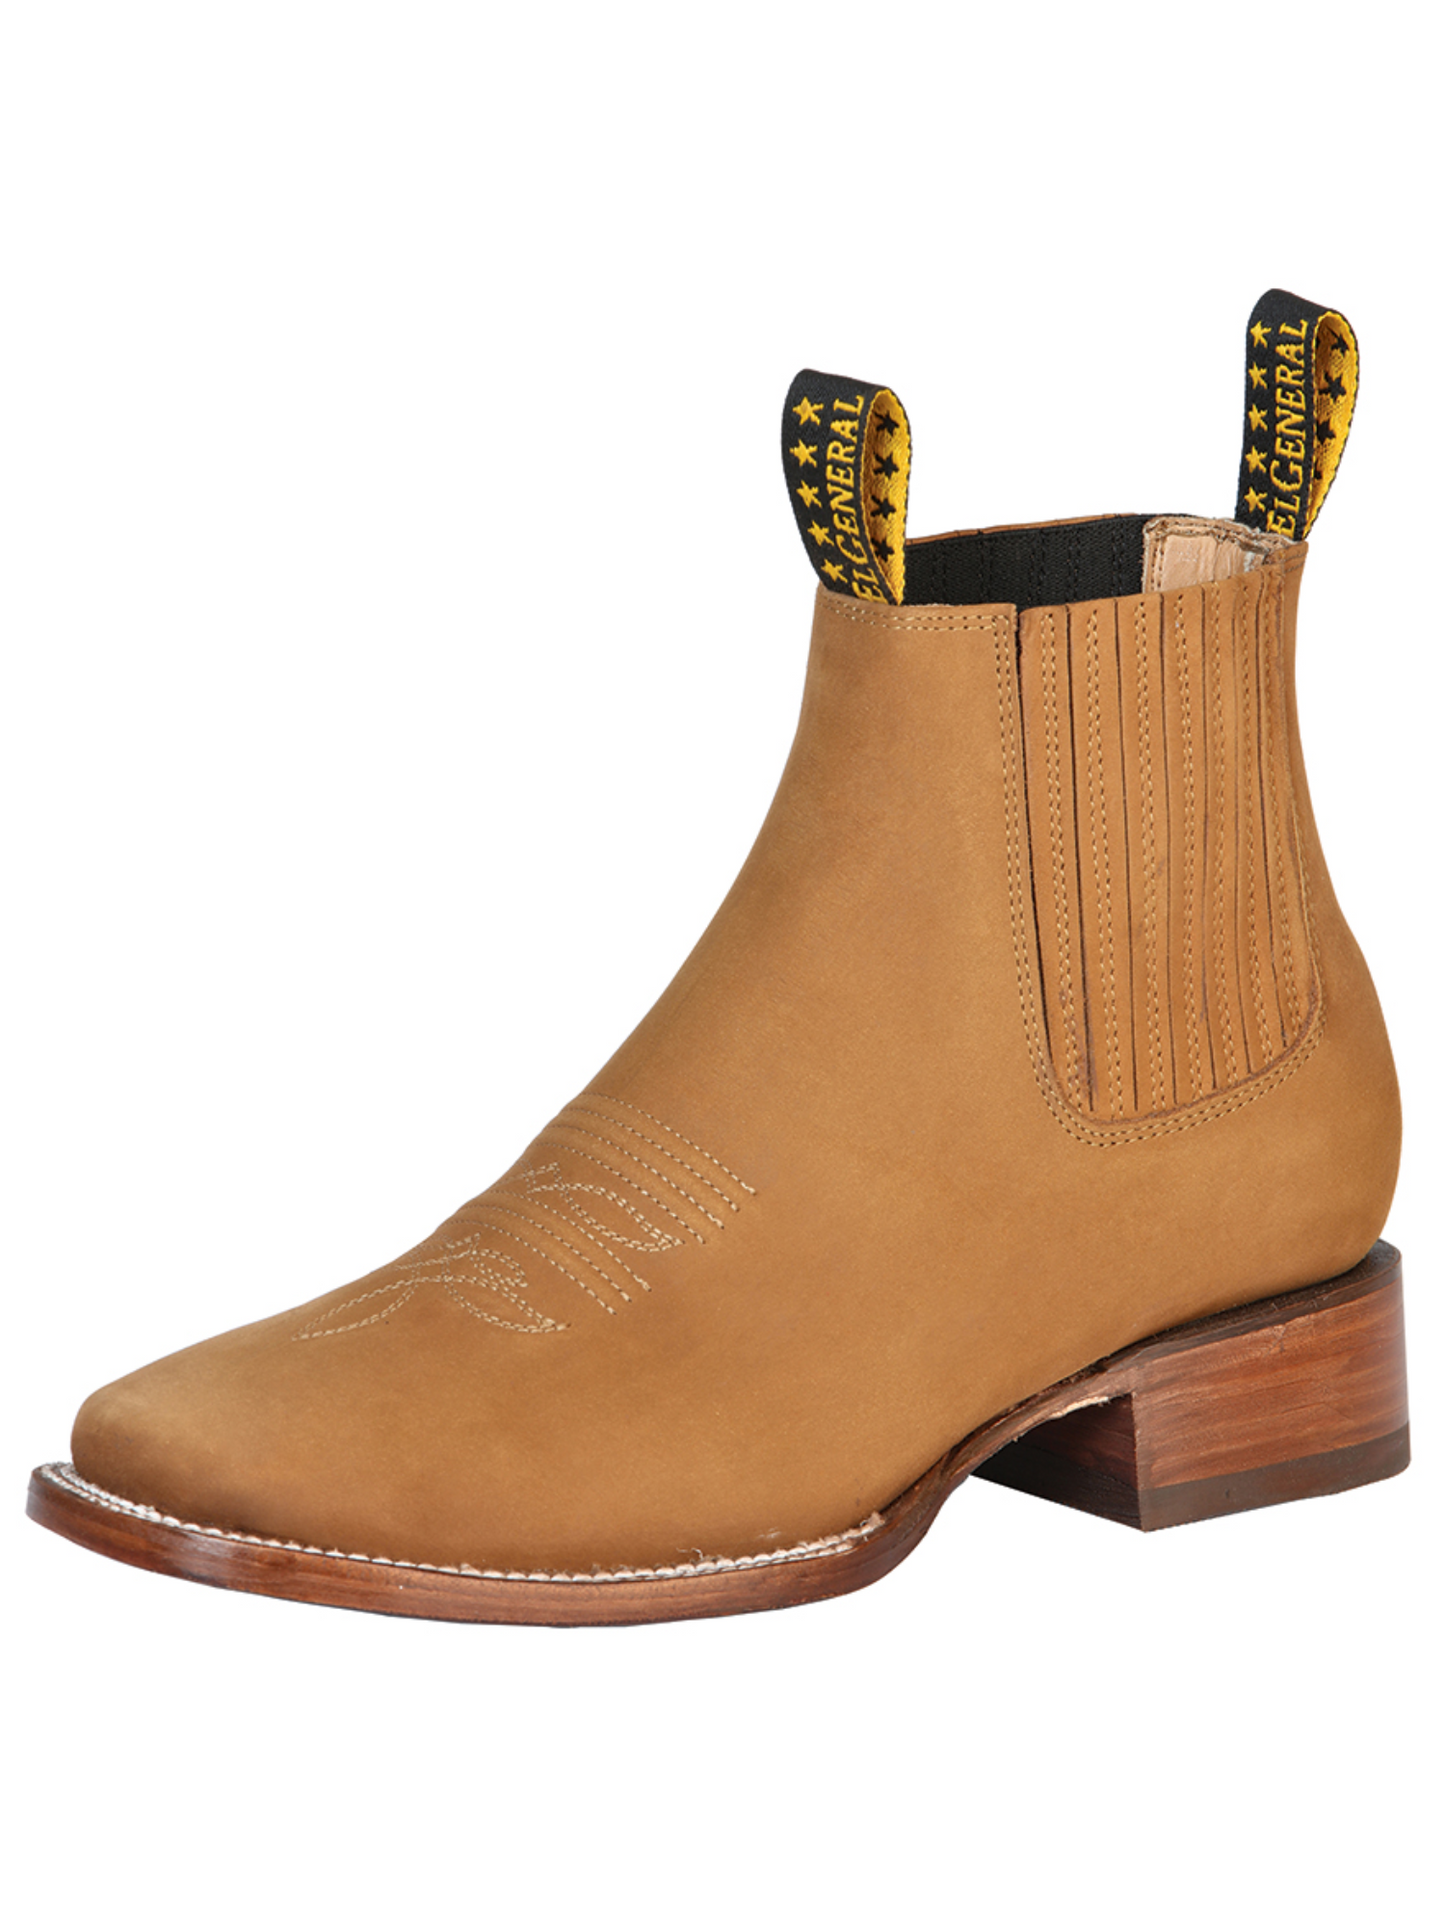 Classic Nubuck Leather Rodeo Cowboy Ankle Boots for Men 'El General' - ID: 126190 Western Ankle Boots El General Old Gold